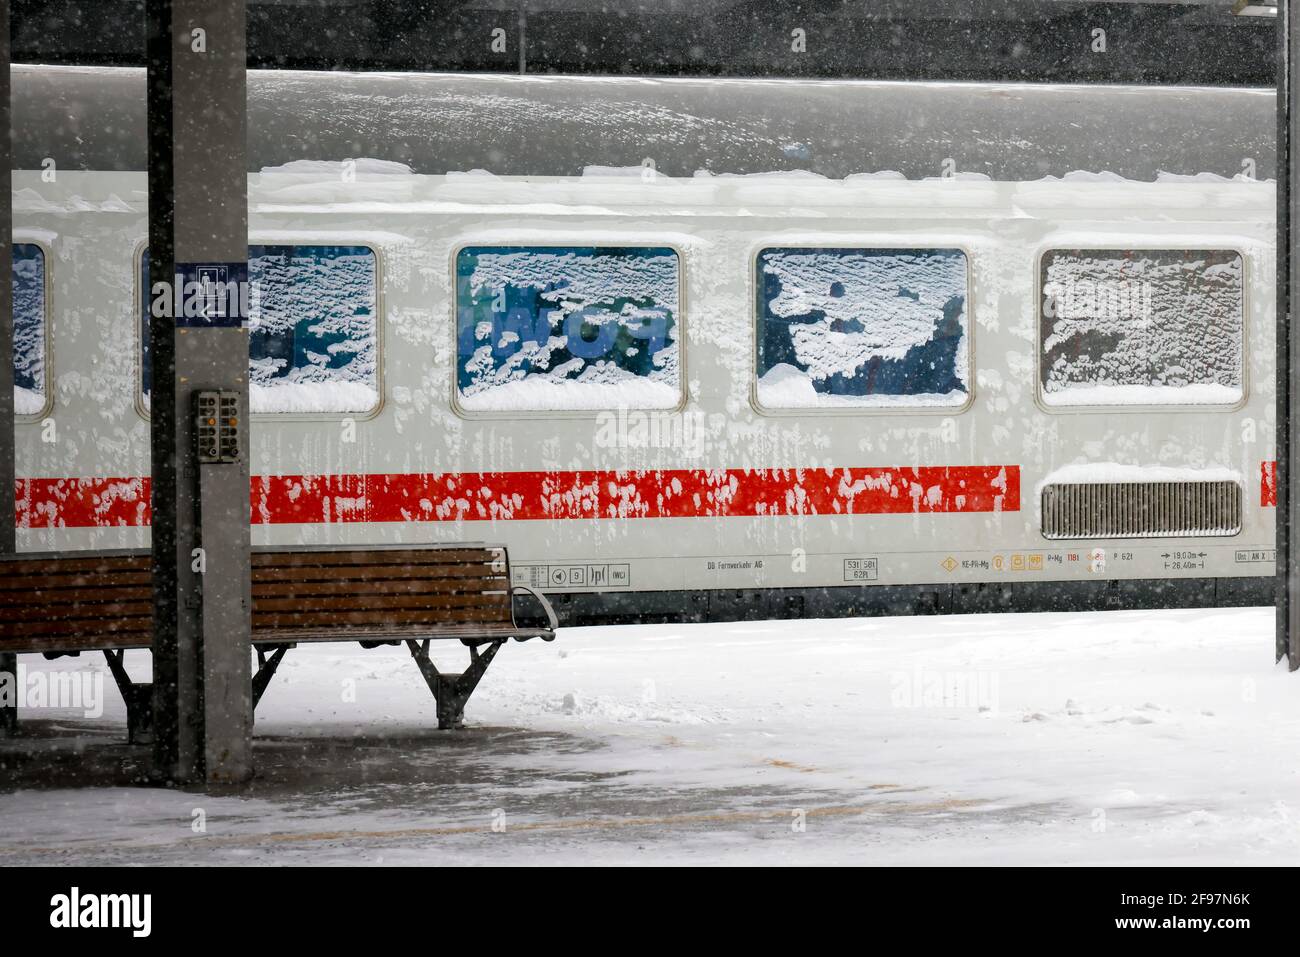 Essen, North Rhine-Westphalia, Germany - onset of winter in the Ruhr area, Essen train station, many trains are delayed or canceled due to ice and snow. Stock Photo